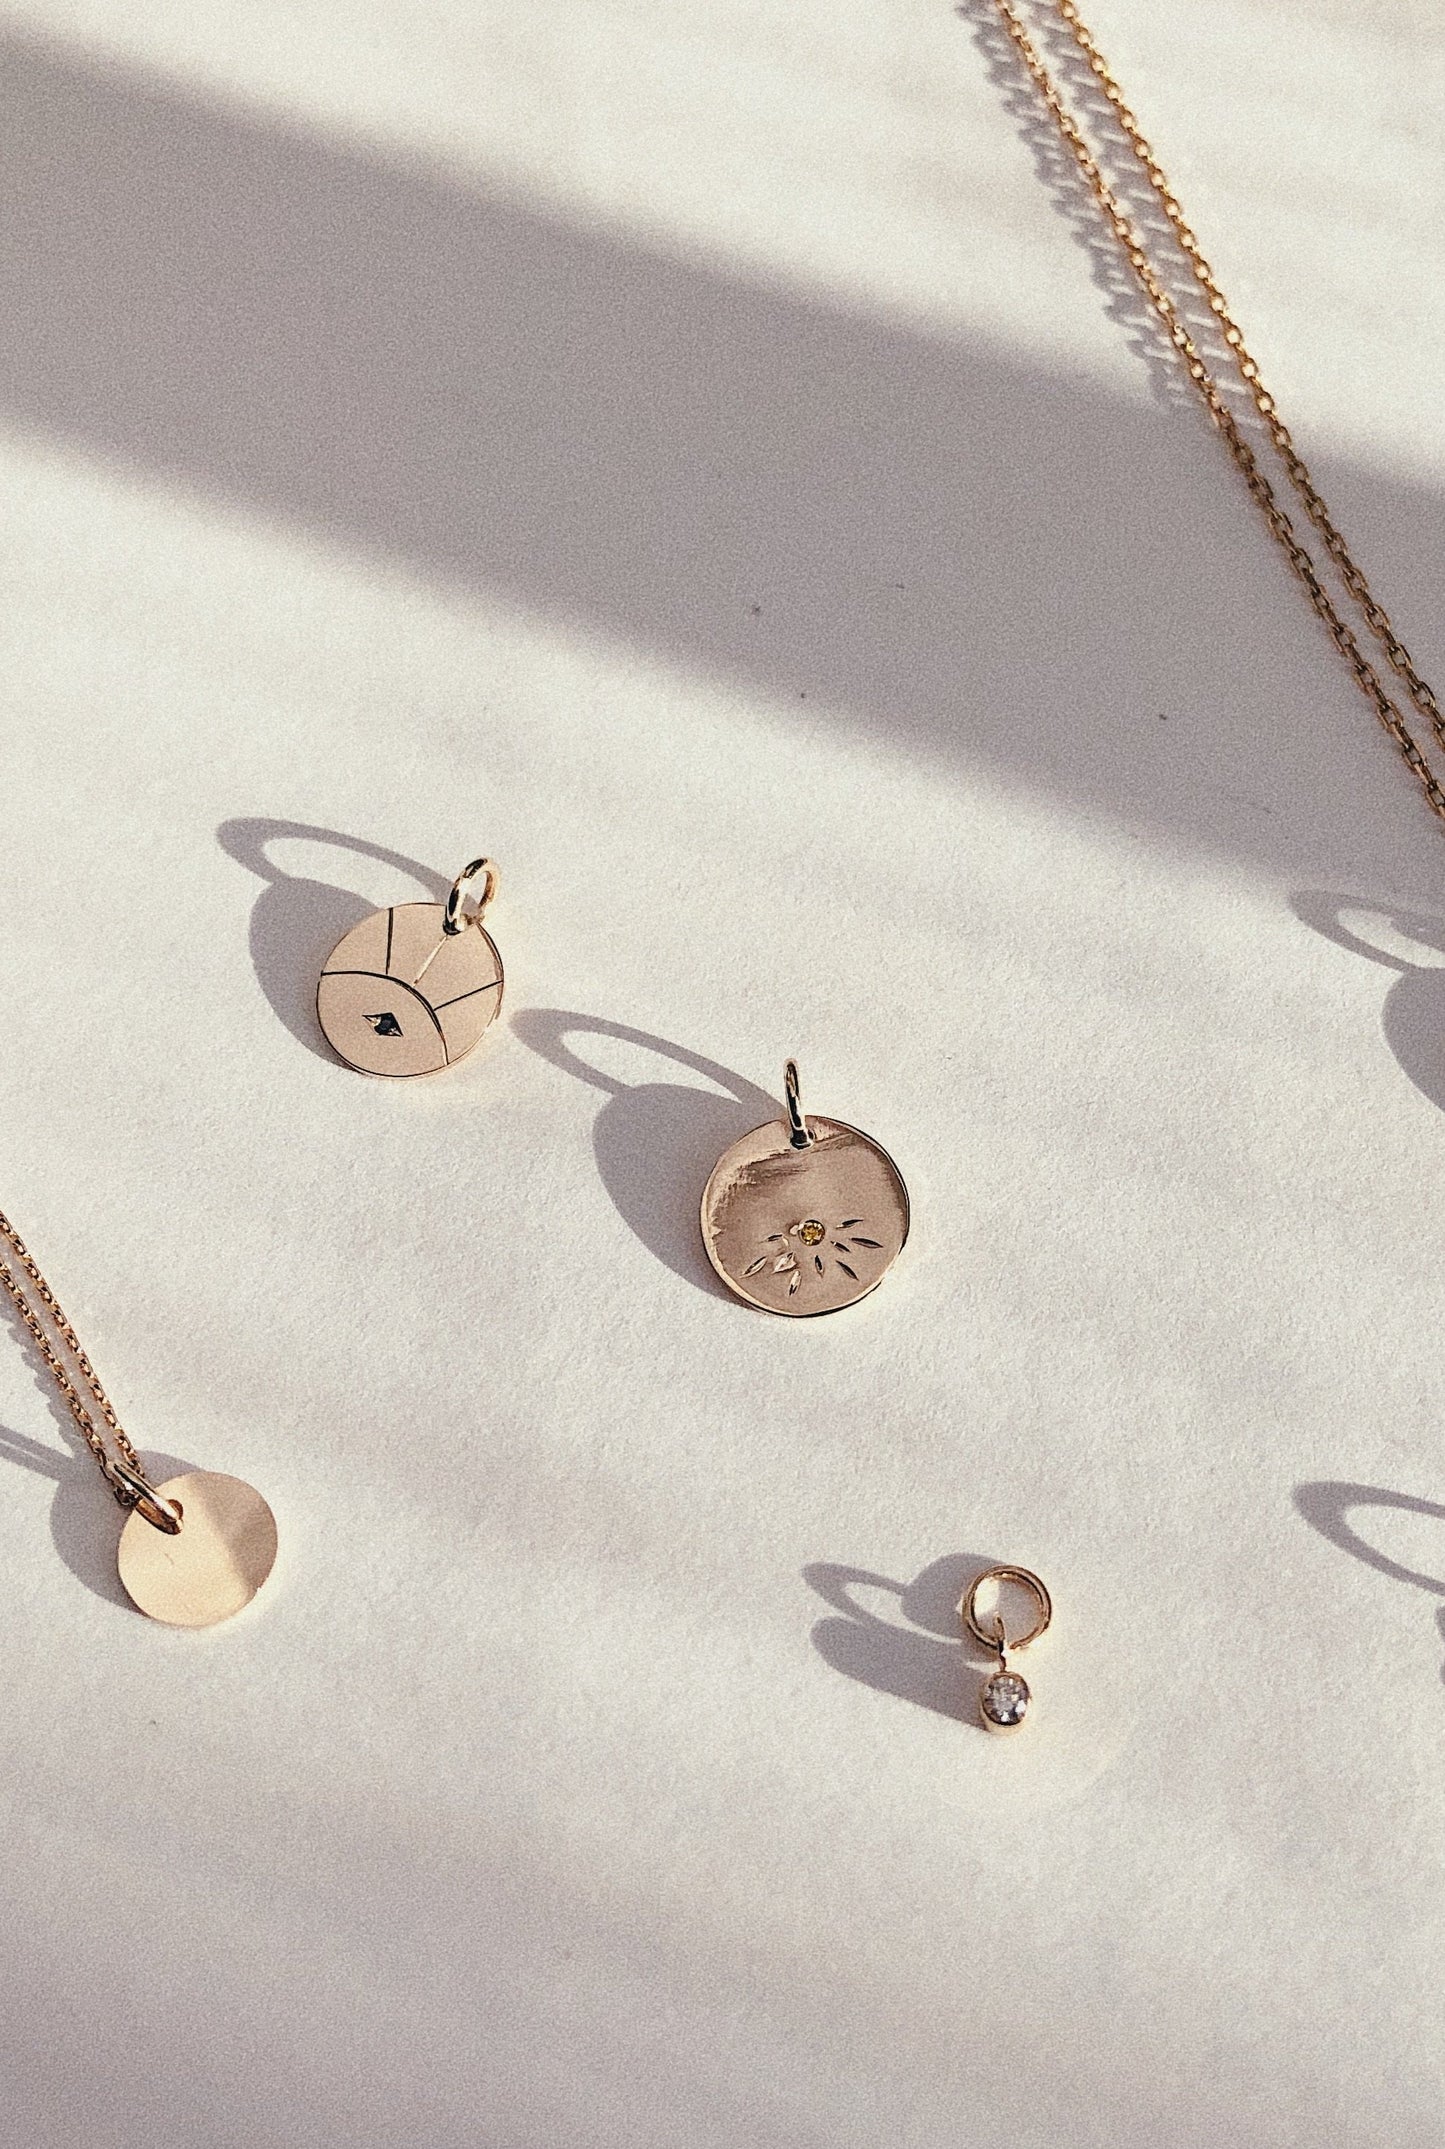 Charms and pendants in solid gold handmade by Adriana Chede Jewellery